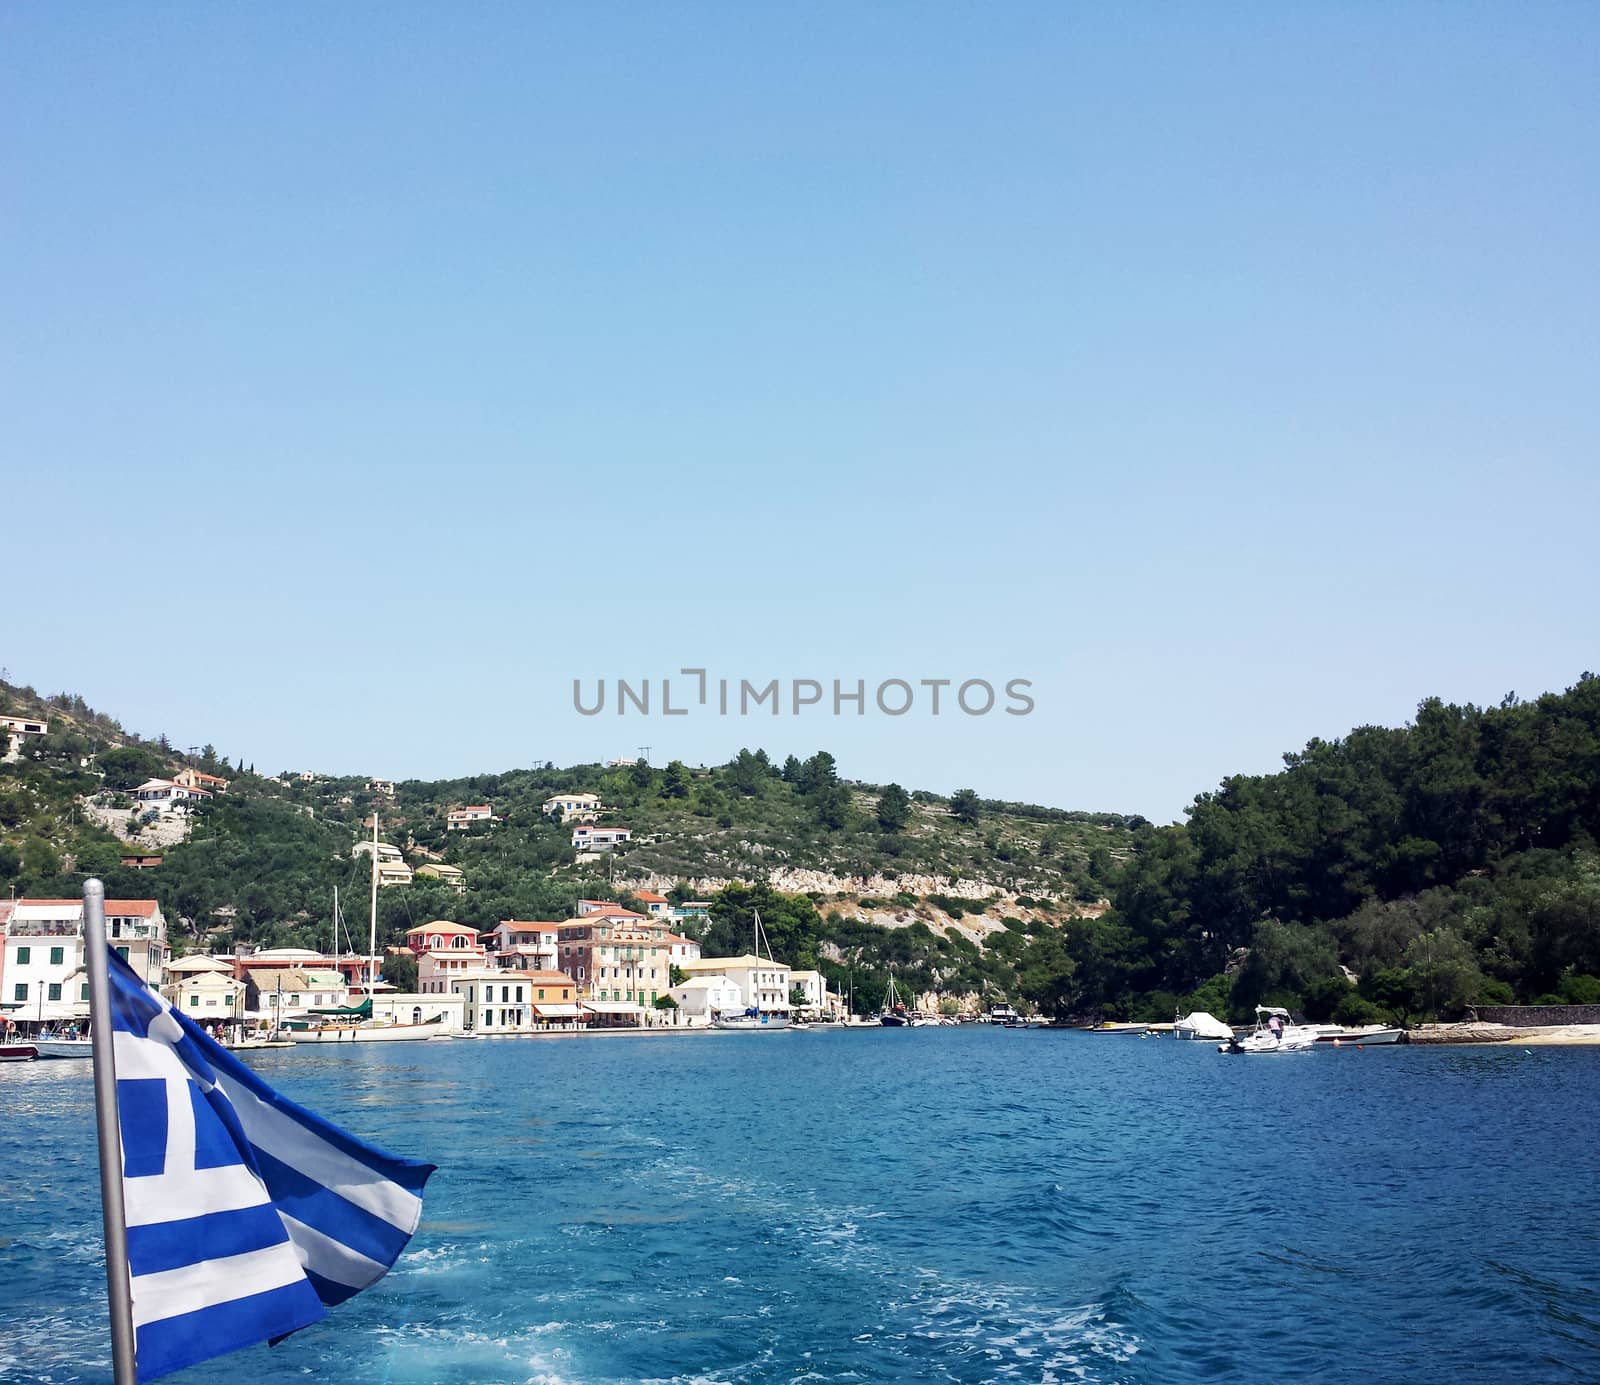 Leaving the port on a boat with a Greek Flag, Gaios Port, Paxos Island, Greece.

Picture taken on July 5, 2014.